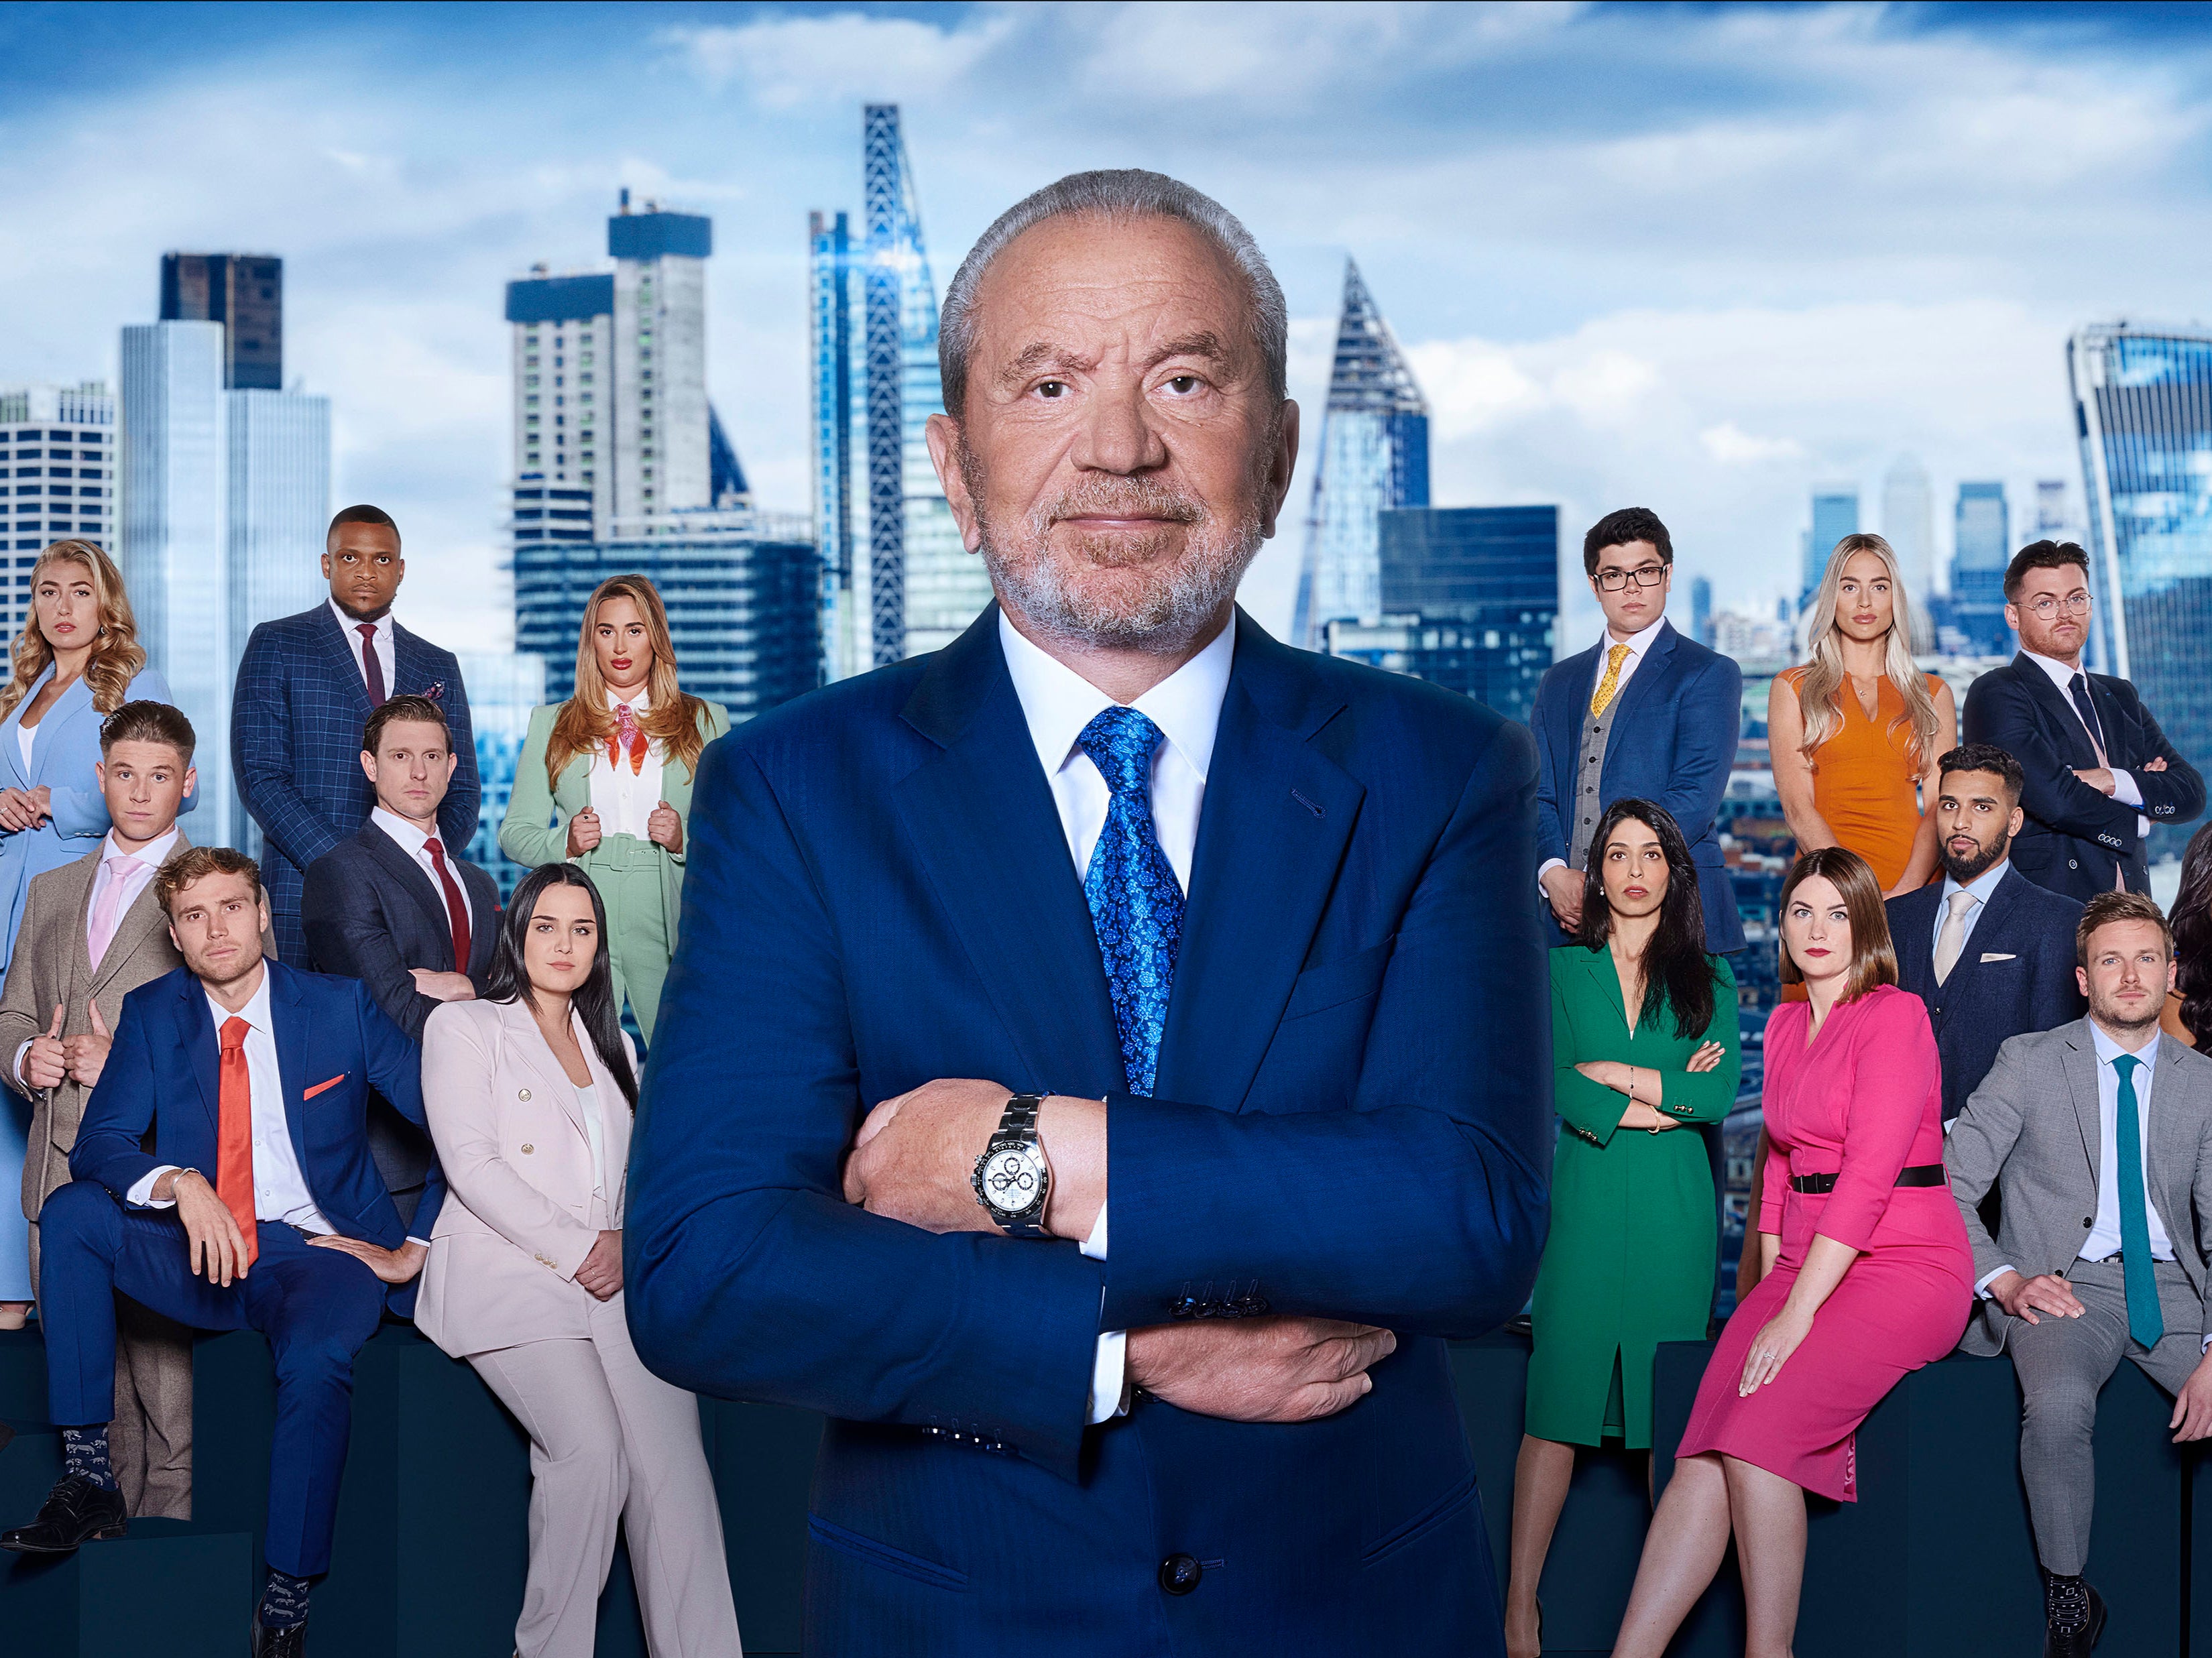 Candidates on The Apprentice always give 110 per cent